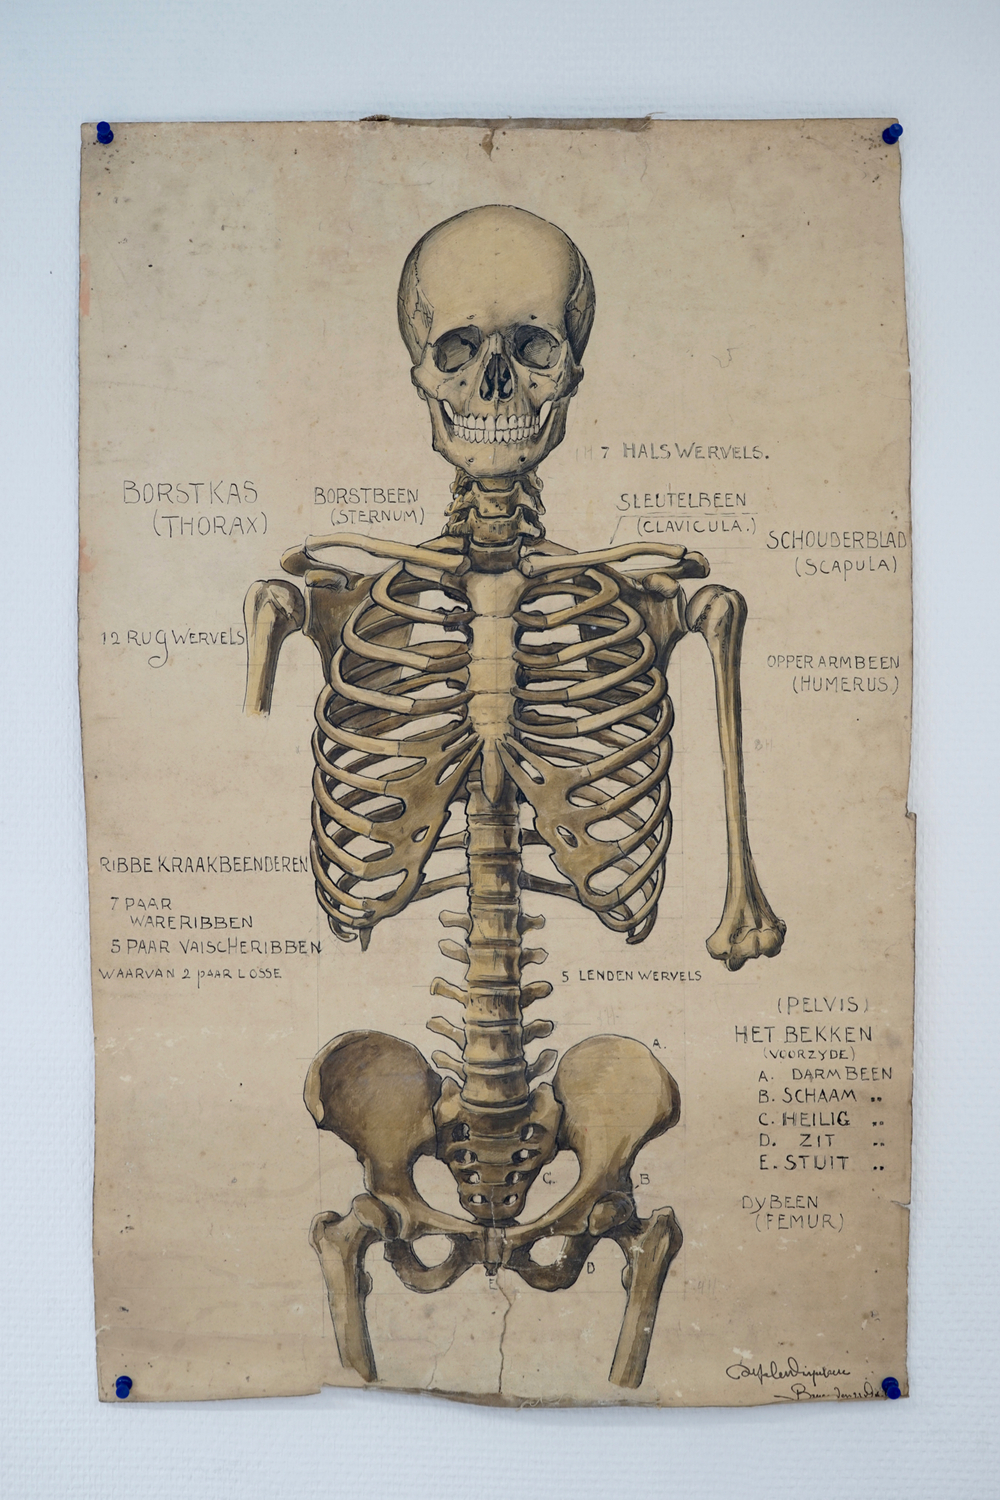 Two large anatomical drawings of human skeletons, ca. 1939